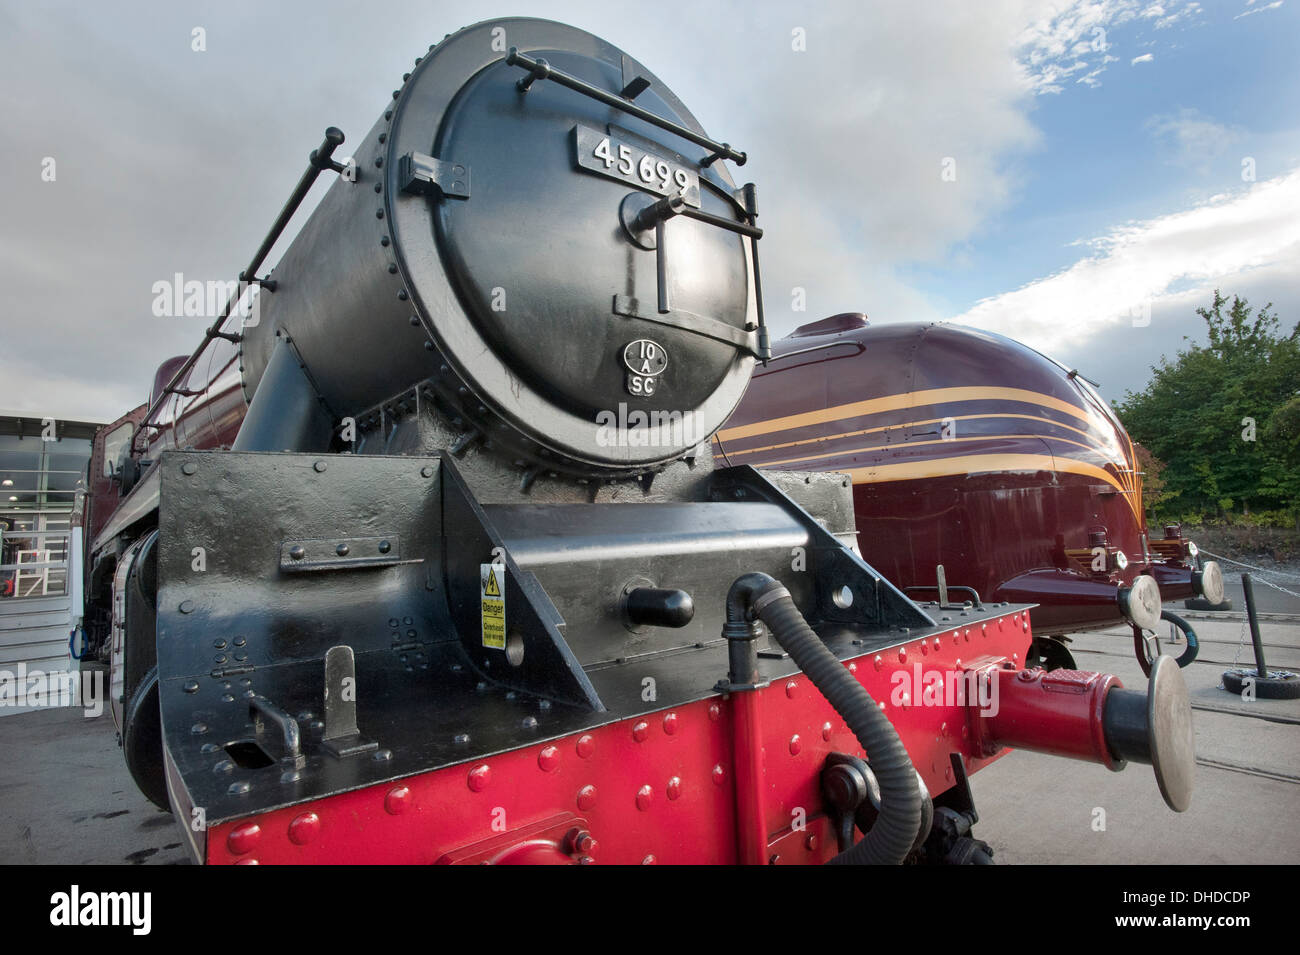 LMS (London Midland Scottish) Julbilee class steam locomotive 45699, 'GALATEA' stands in front of Streamlined LMS 'Princess Coronation' class No.6229 'Duchess of Hamilton' at the National Railway Museums overflow museum at Shildon, County Durham. Stock Photo